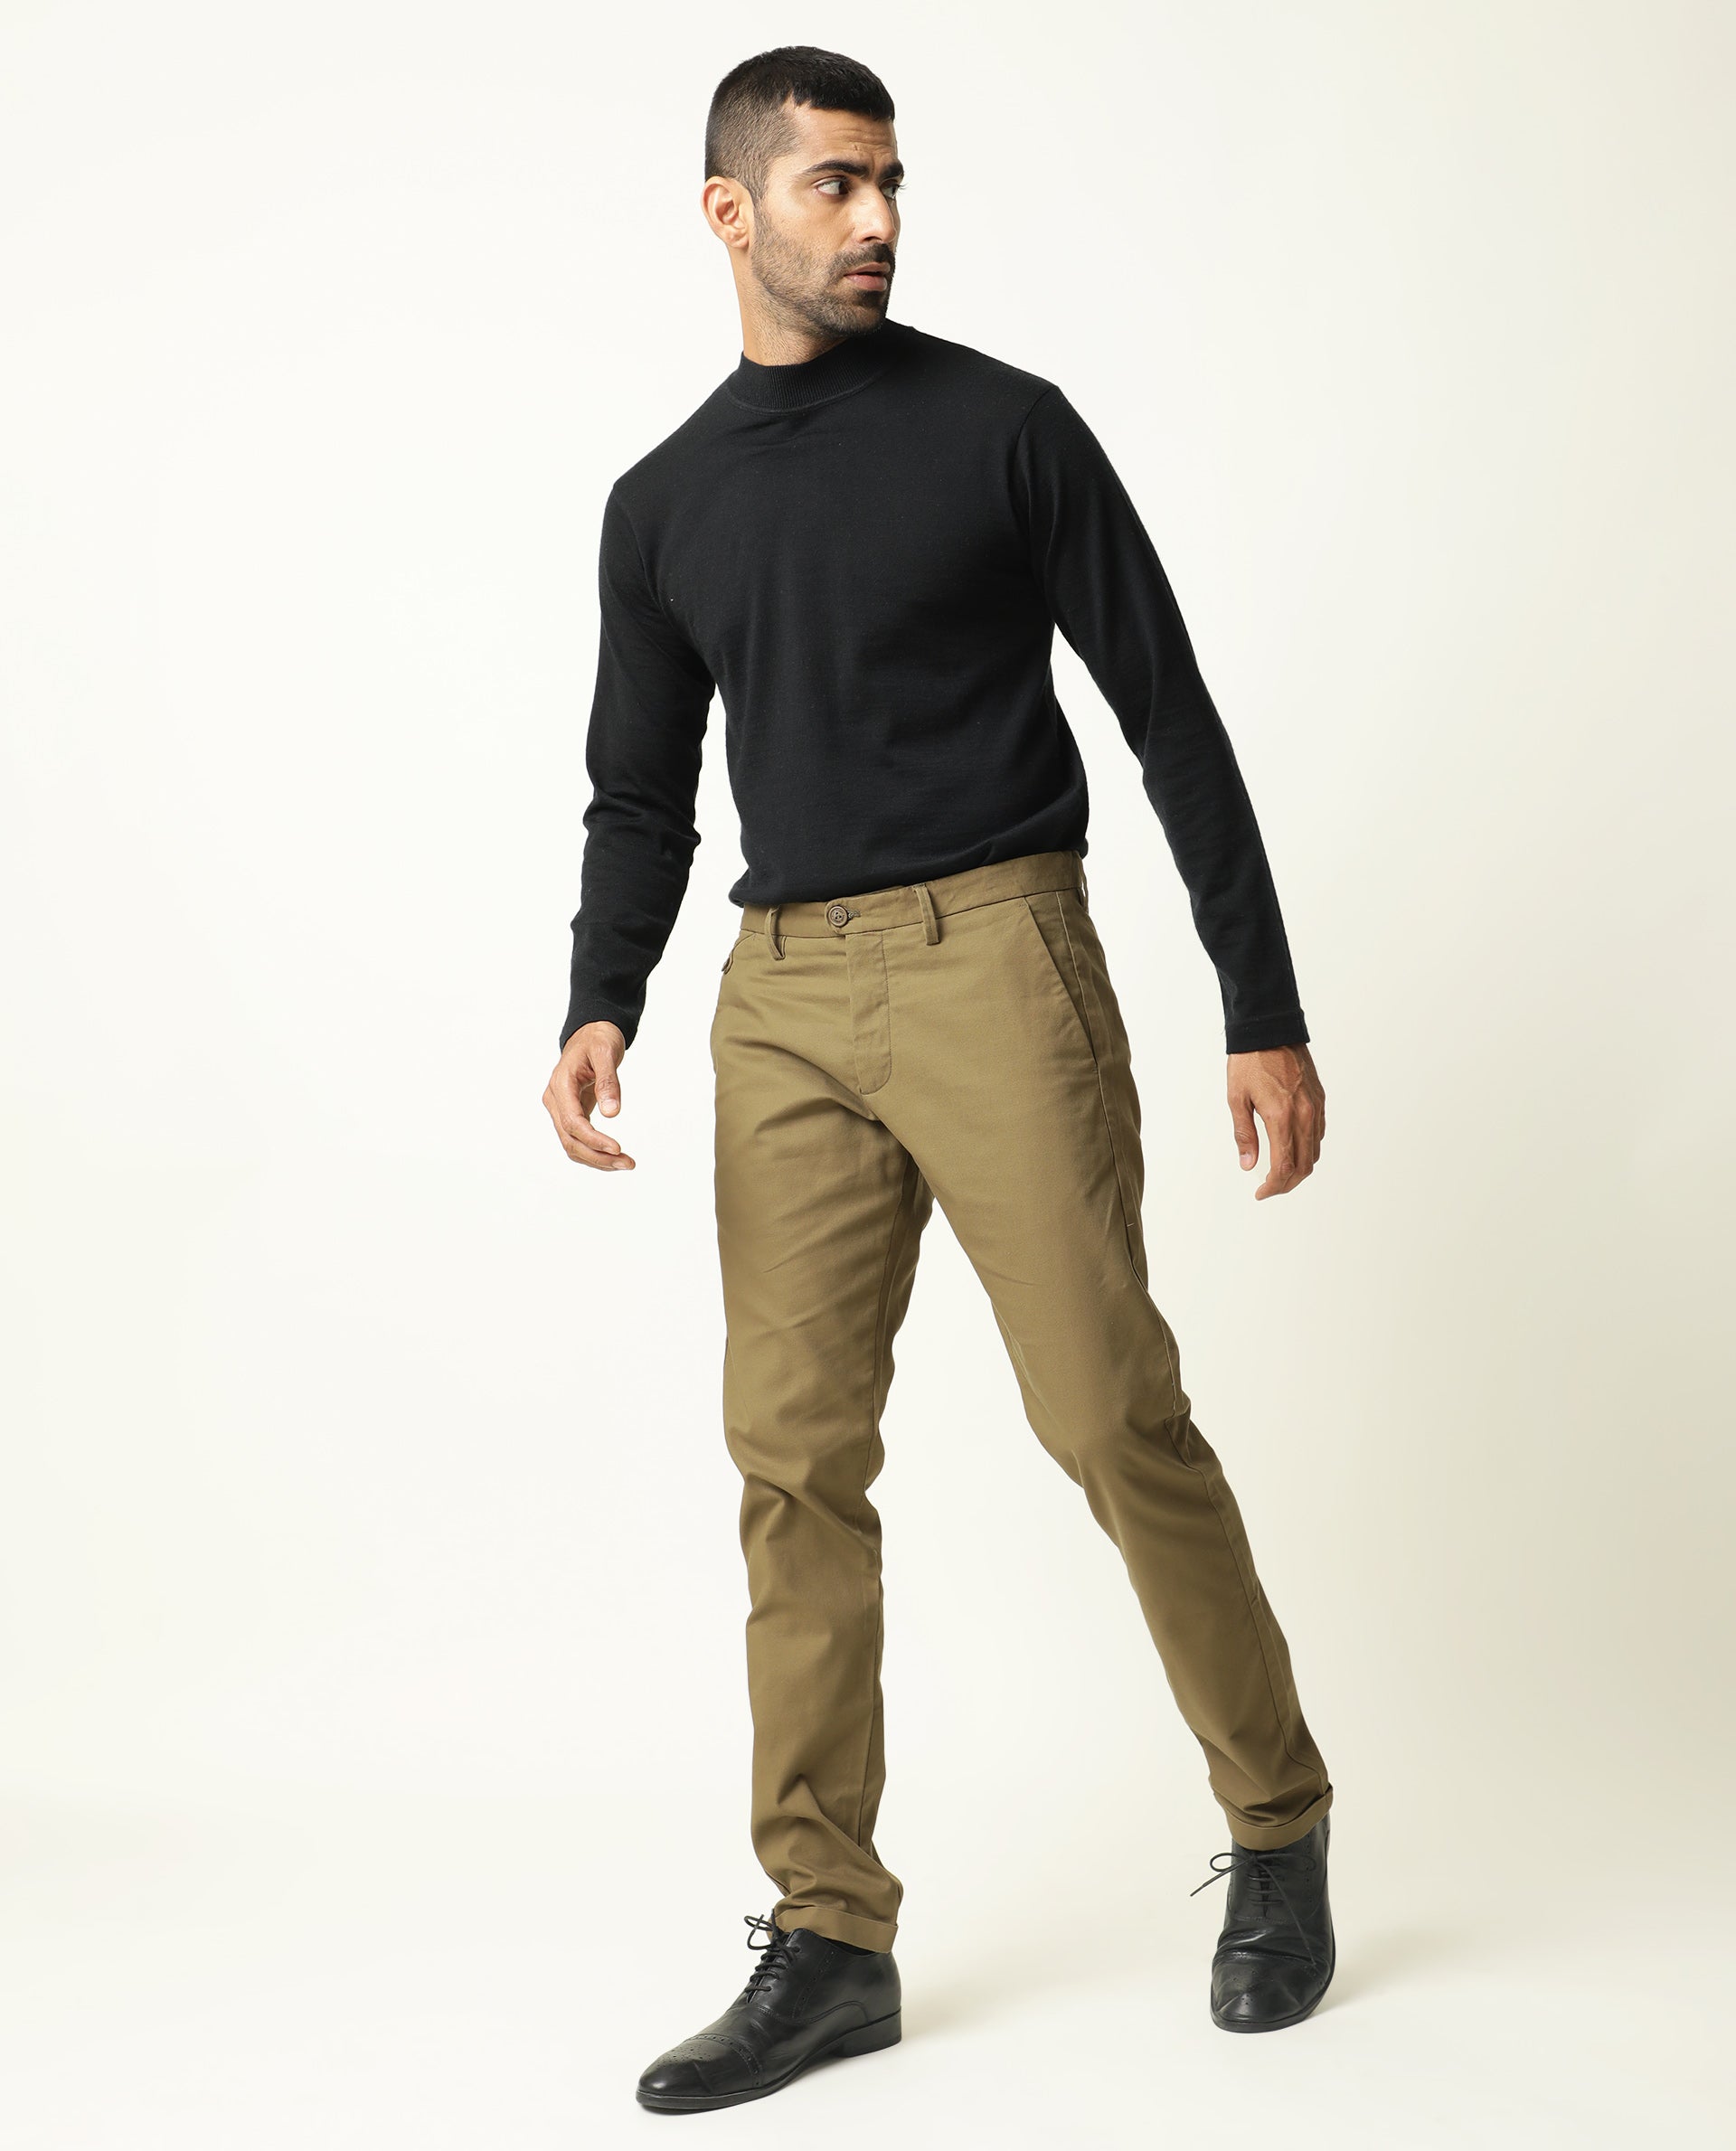 RARE RABBIT Formal Trousers outlet - 1800 products on sale | FASHIOLA.co.uk